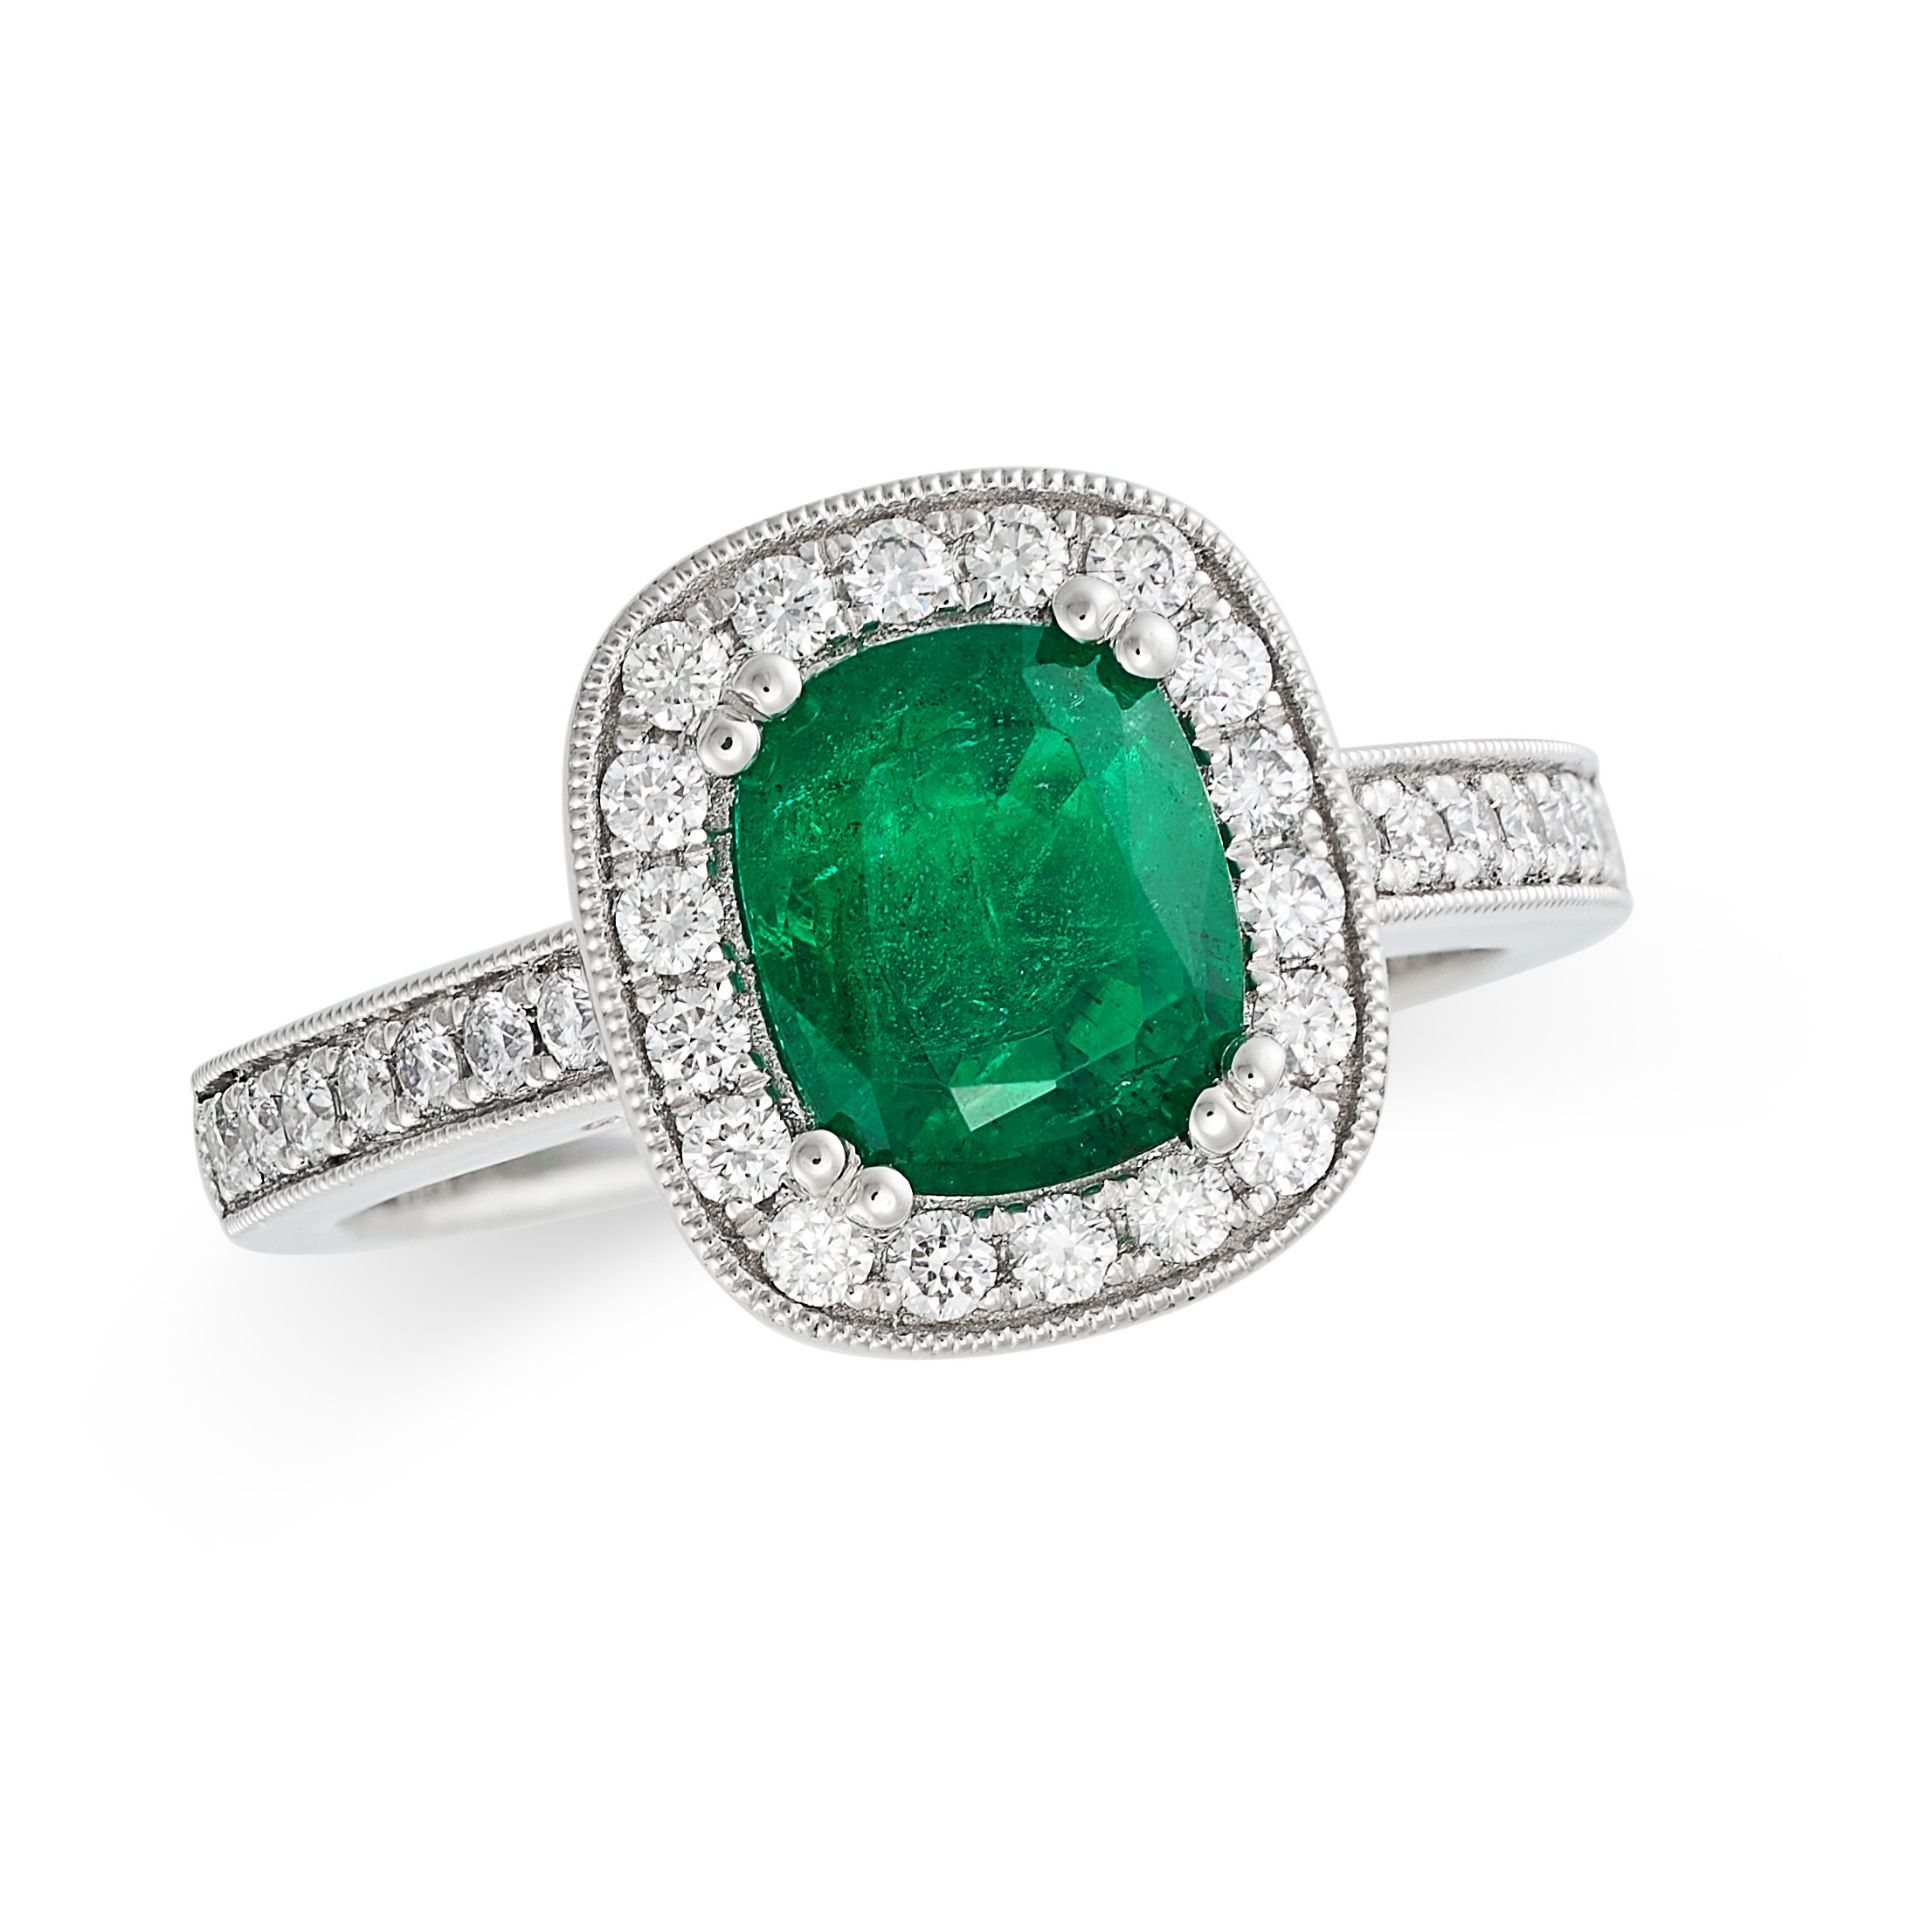 AN EMERALD AND DIAMOND CLUSTER RING in platinum, set with a cushion cut emerald of 1.40 carats to...